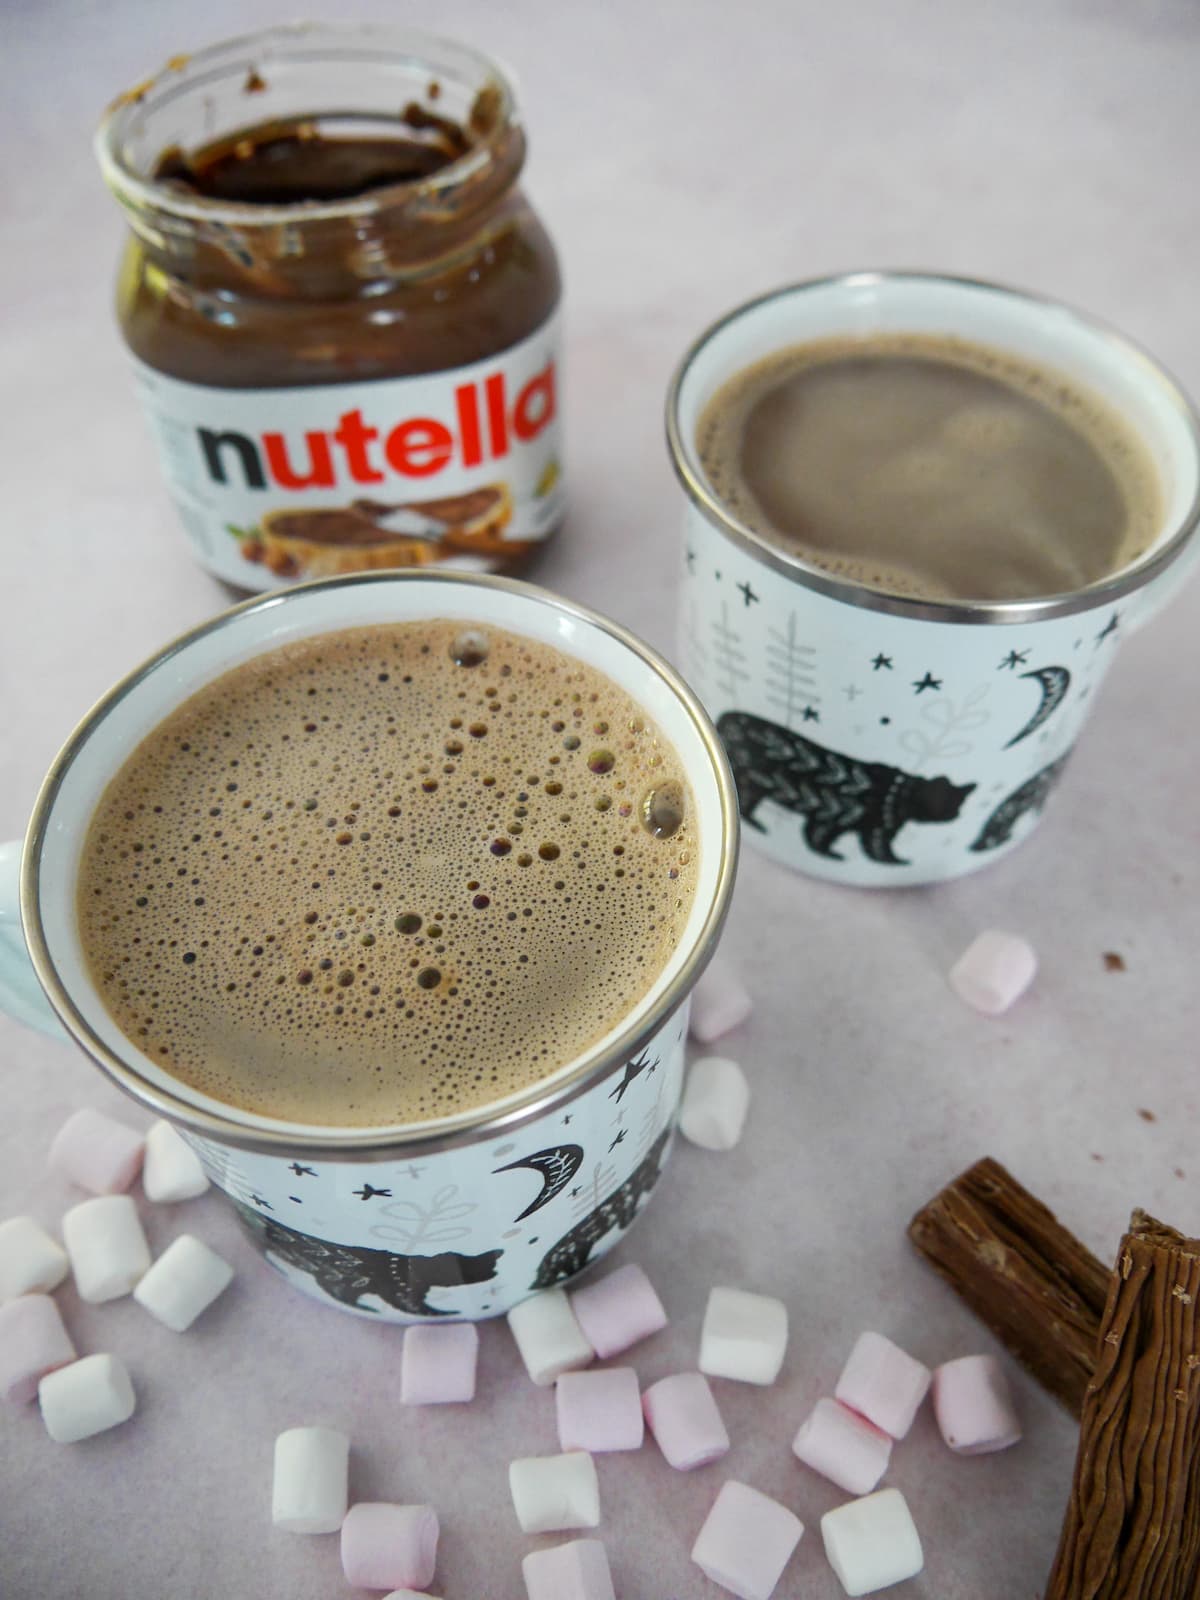 Two mugs of hot chocolate with an open jar of Nutella, mini marshmallows and chocolate logs set alongside.